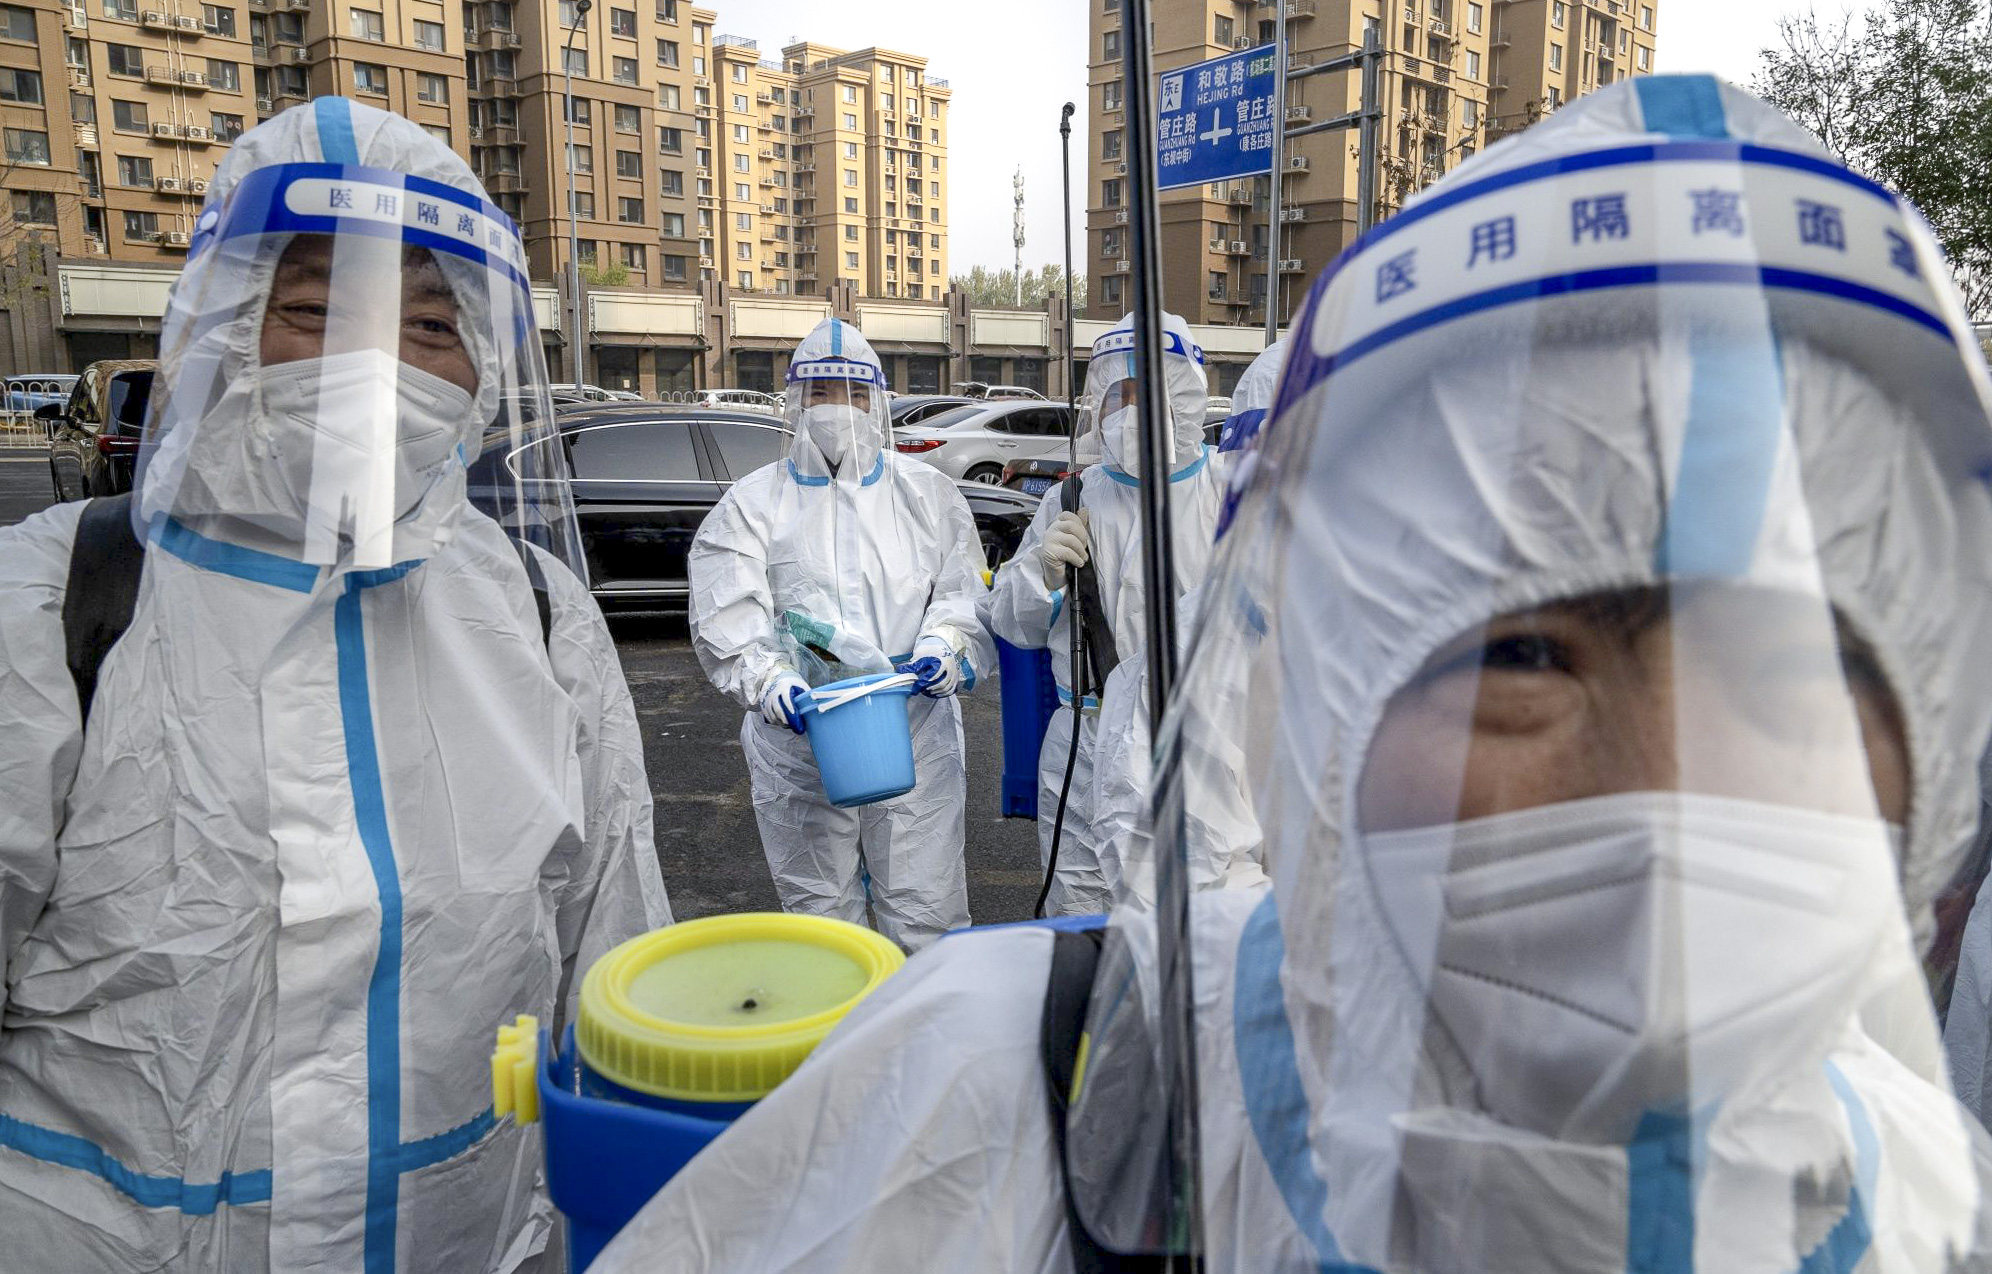 China is fighting a rise in Covid-19 cases, with 10,535 local infections reported on Friday morning, up from 8,824 a day earlier. Photo: Bloomberg